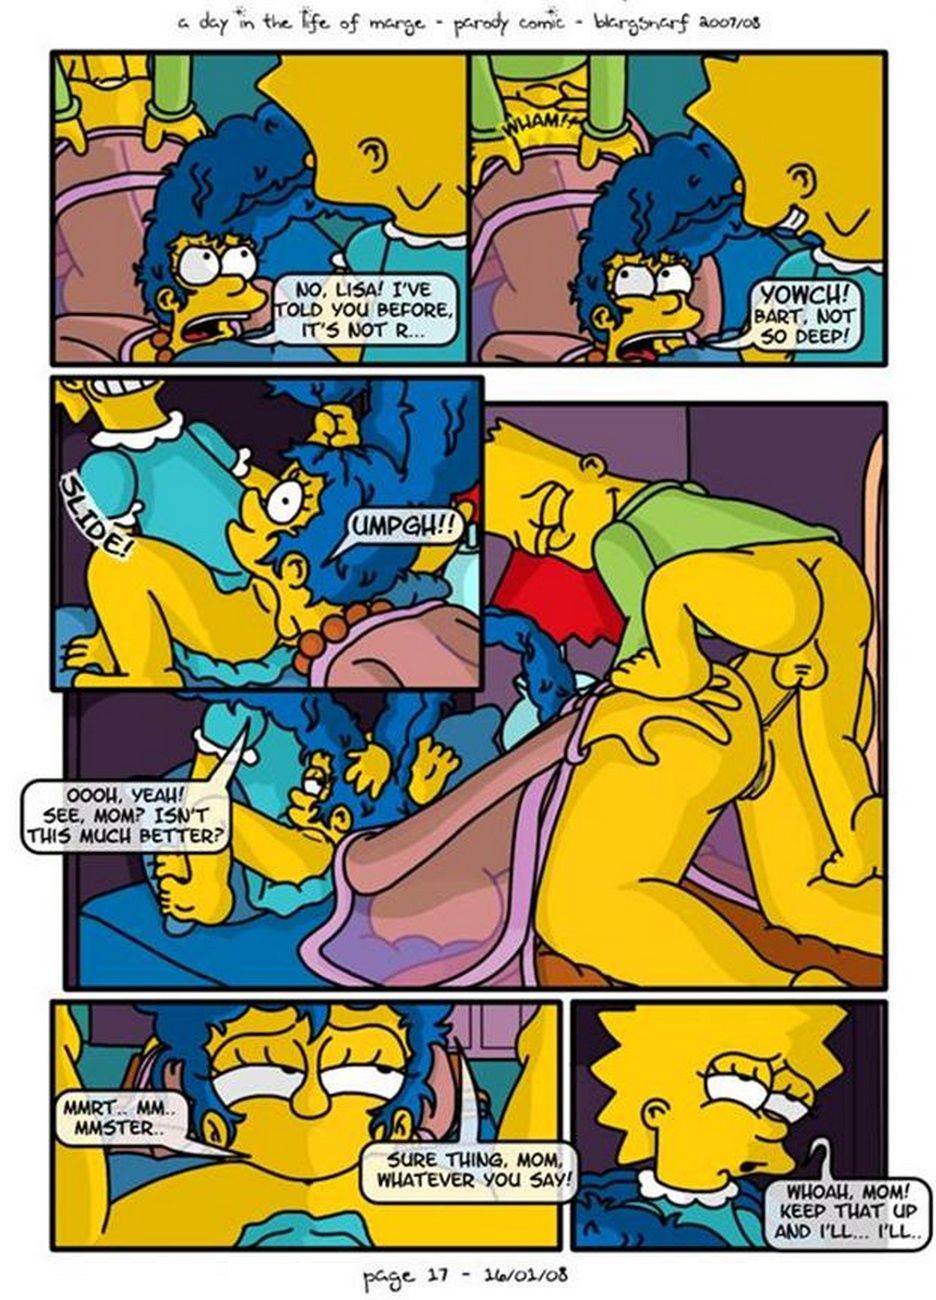 A Day In The Life Of Marge page 18